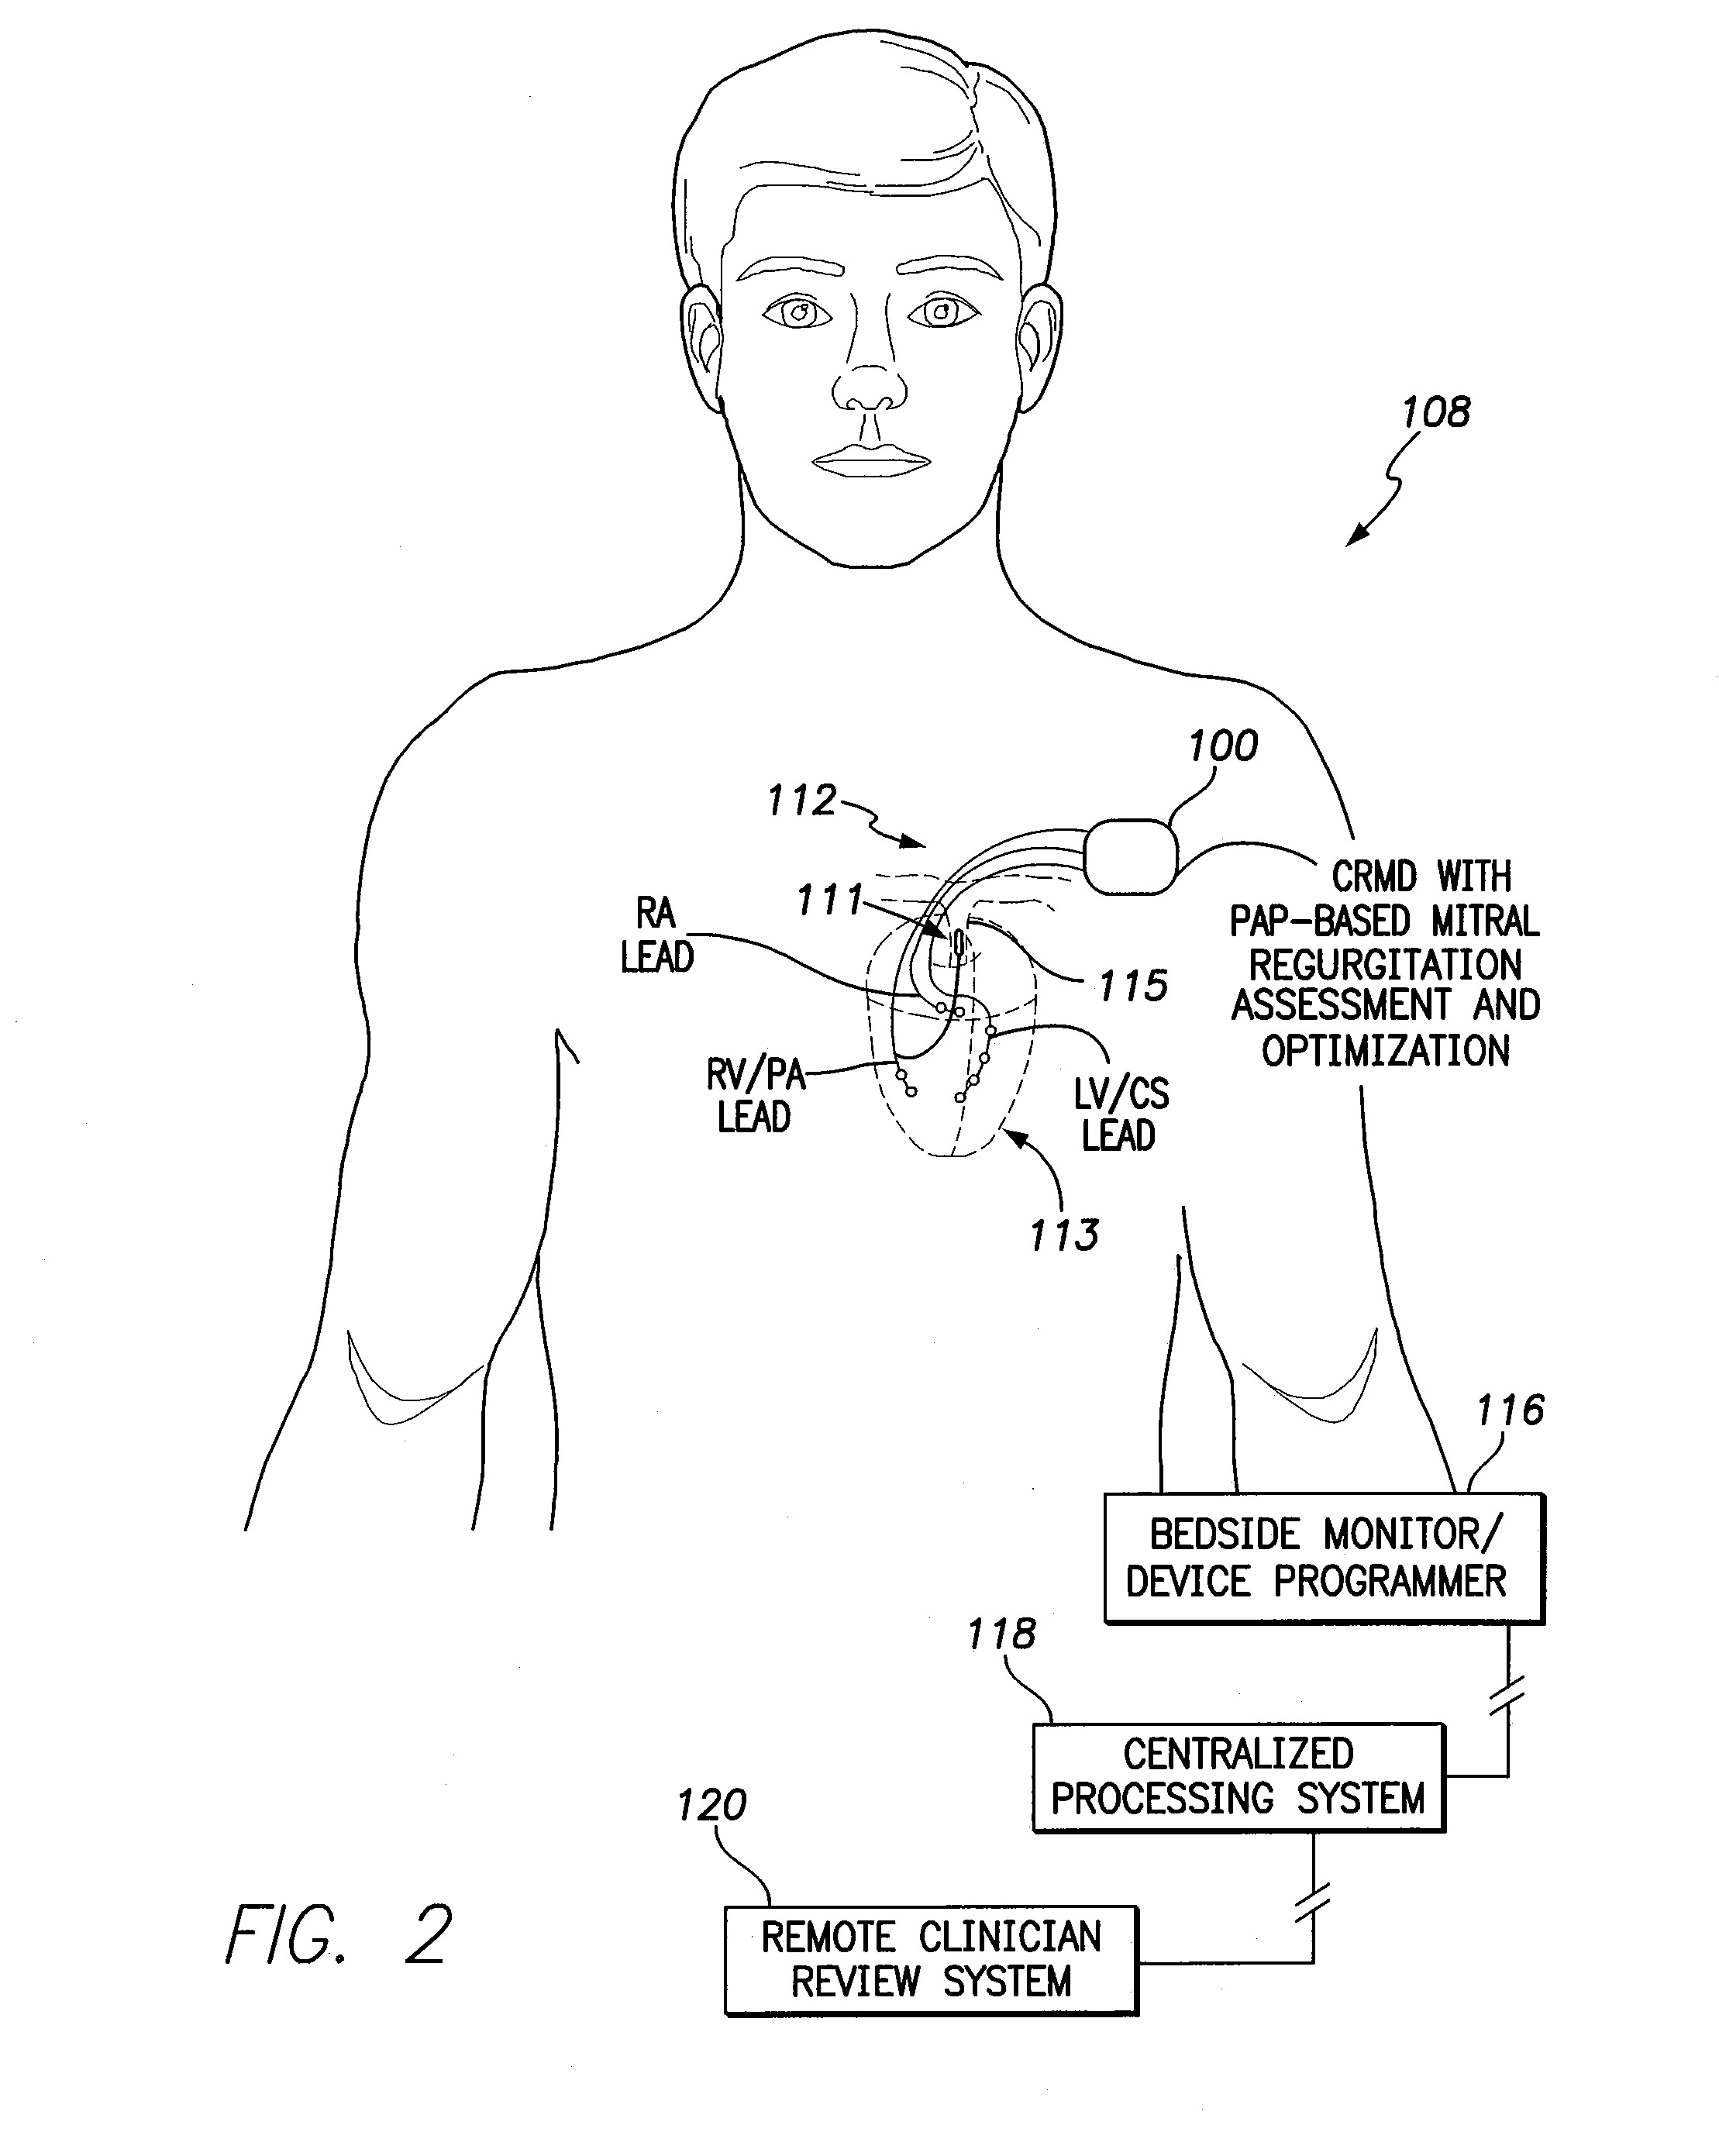 Systems and methods for using pulmonary artery pressure from an implantable sensor to detect mitral regurgitation and optimize pacing delays